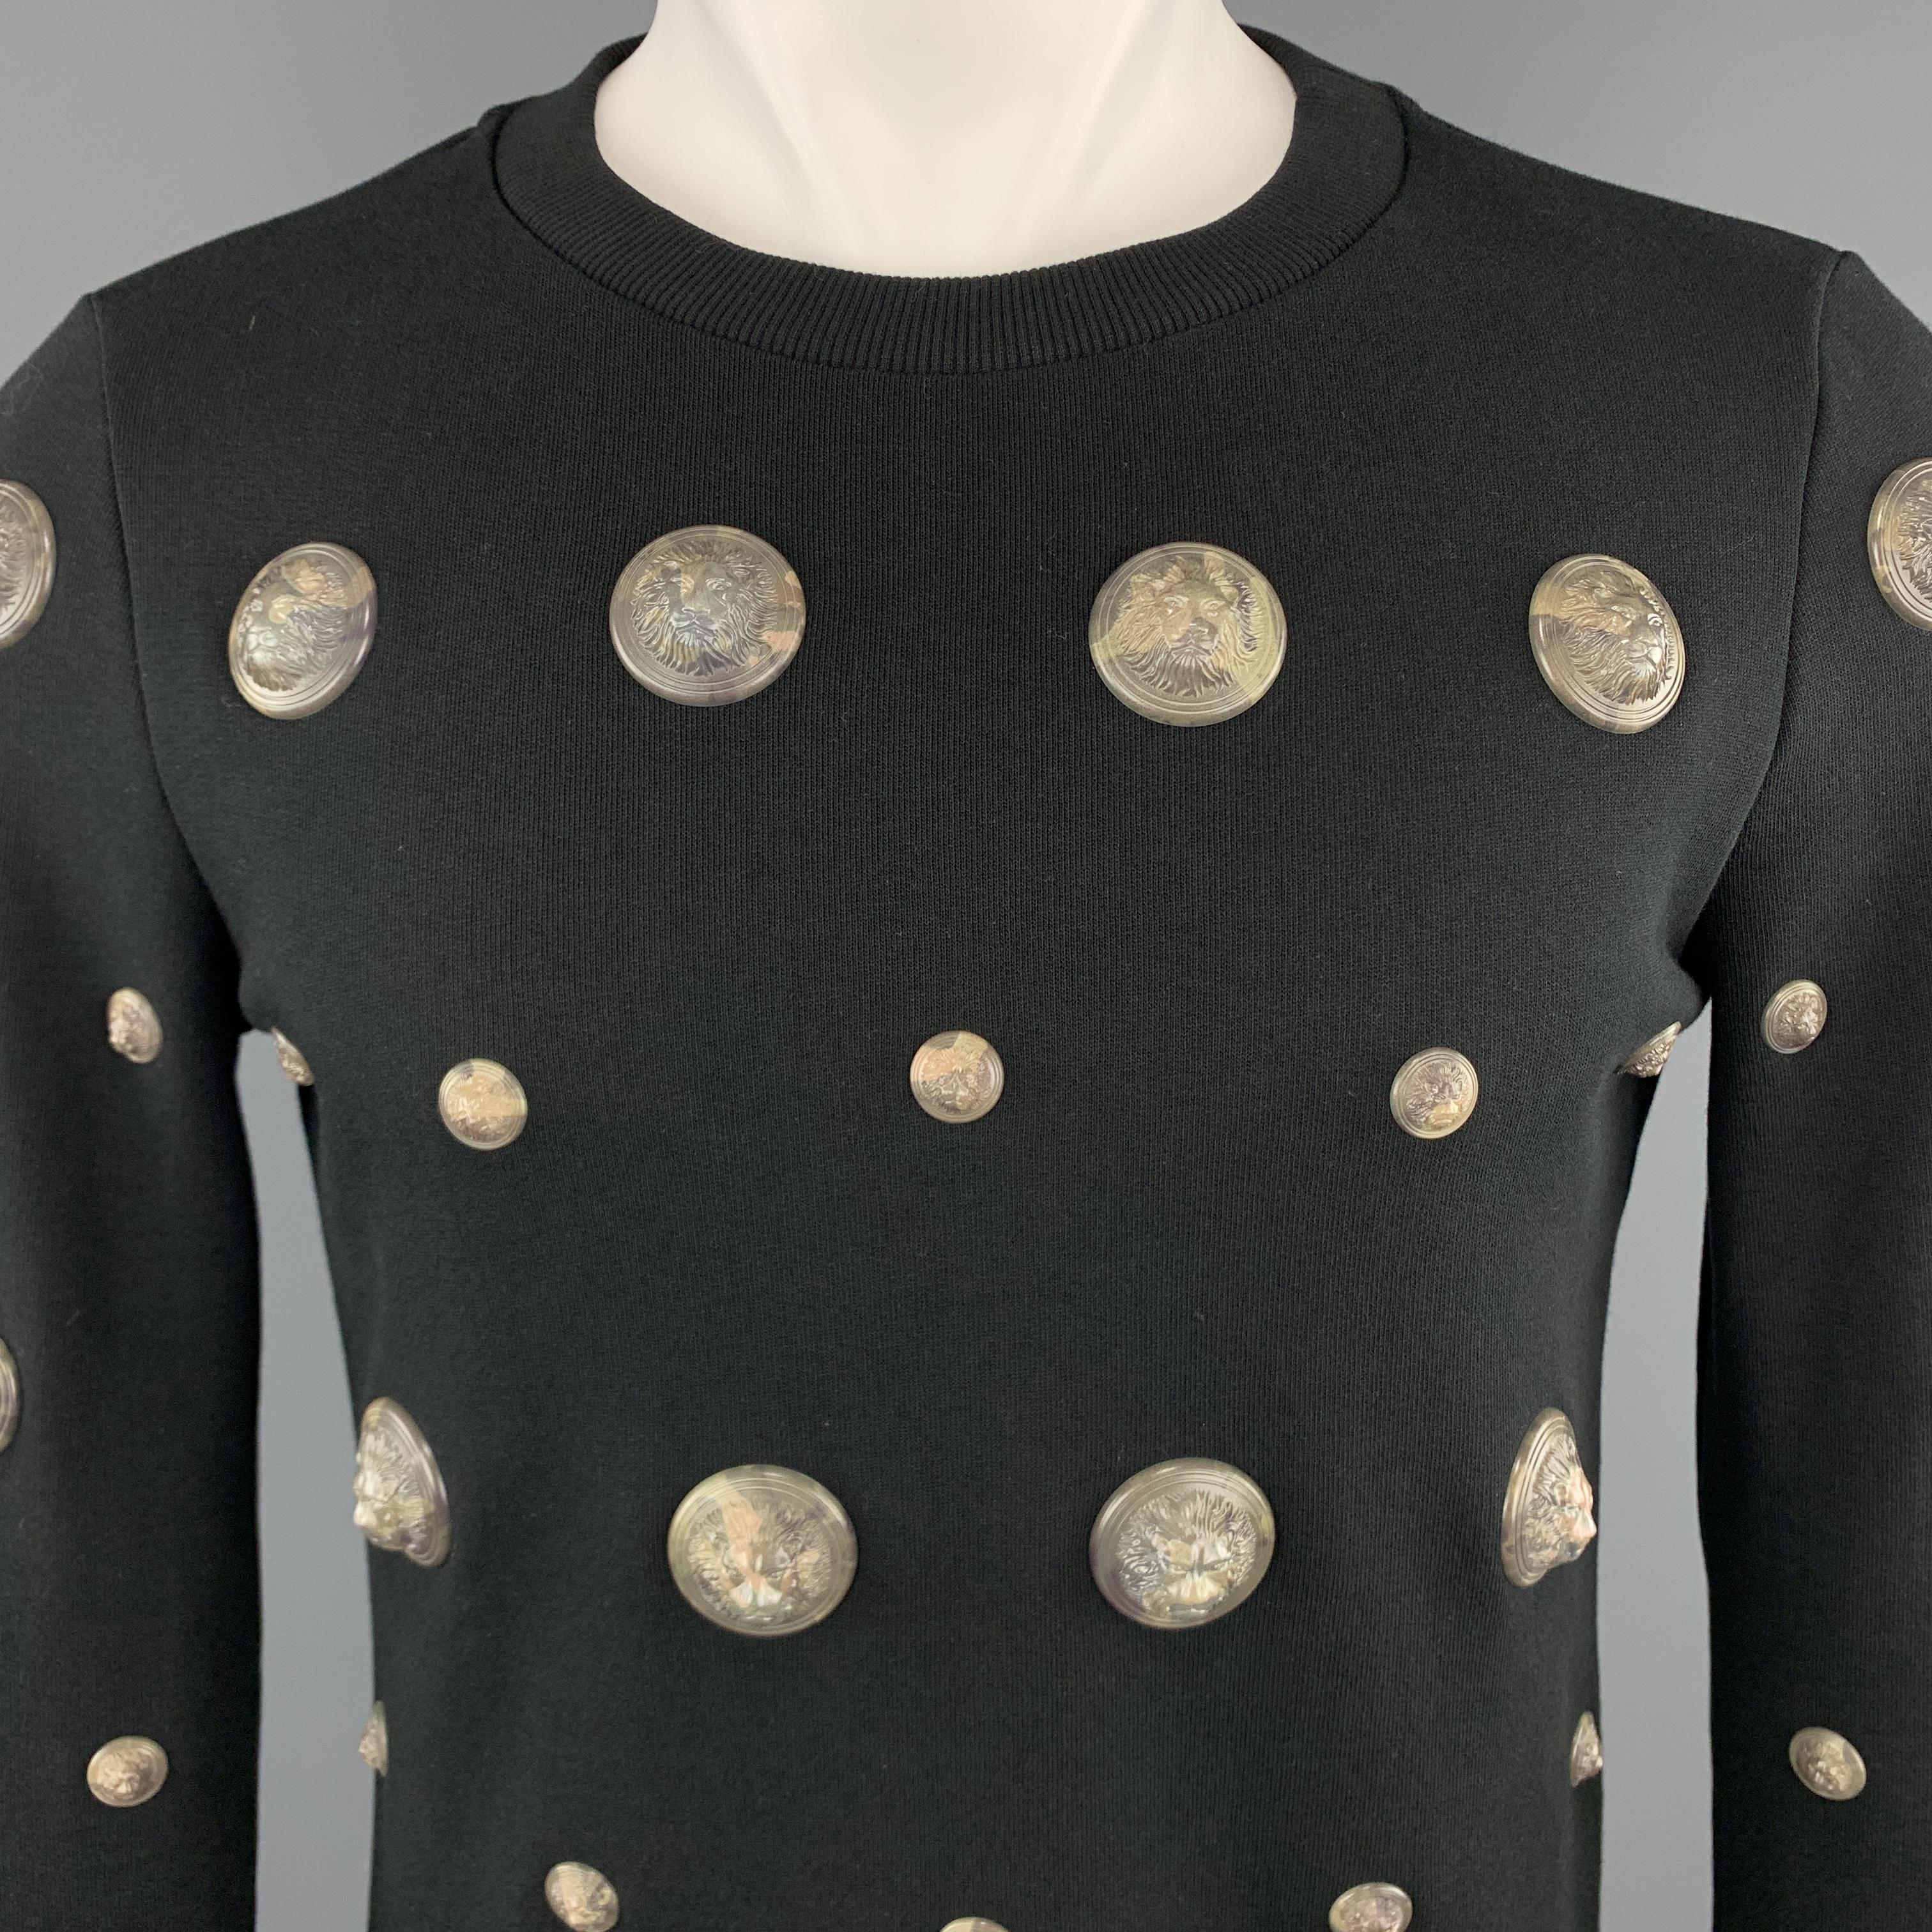 VERSUS by GIANNI VERSACE pullover sweatshirt comes in black jersey with a crewneck and oversized camouflage marble textured 3D lion head studs. Made in Italy.

Excellent Pre-Owned Condition.
Marked: (no size)

Measurements:

Shoulder: 16 in.
Chest: